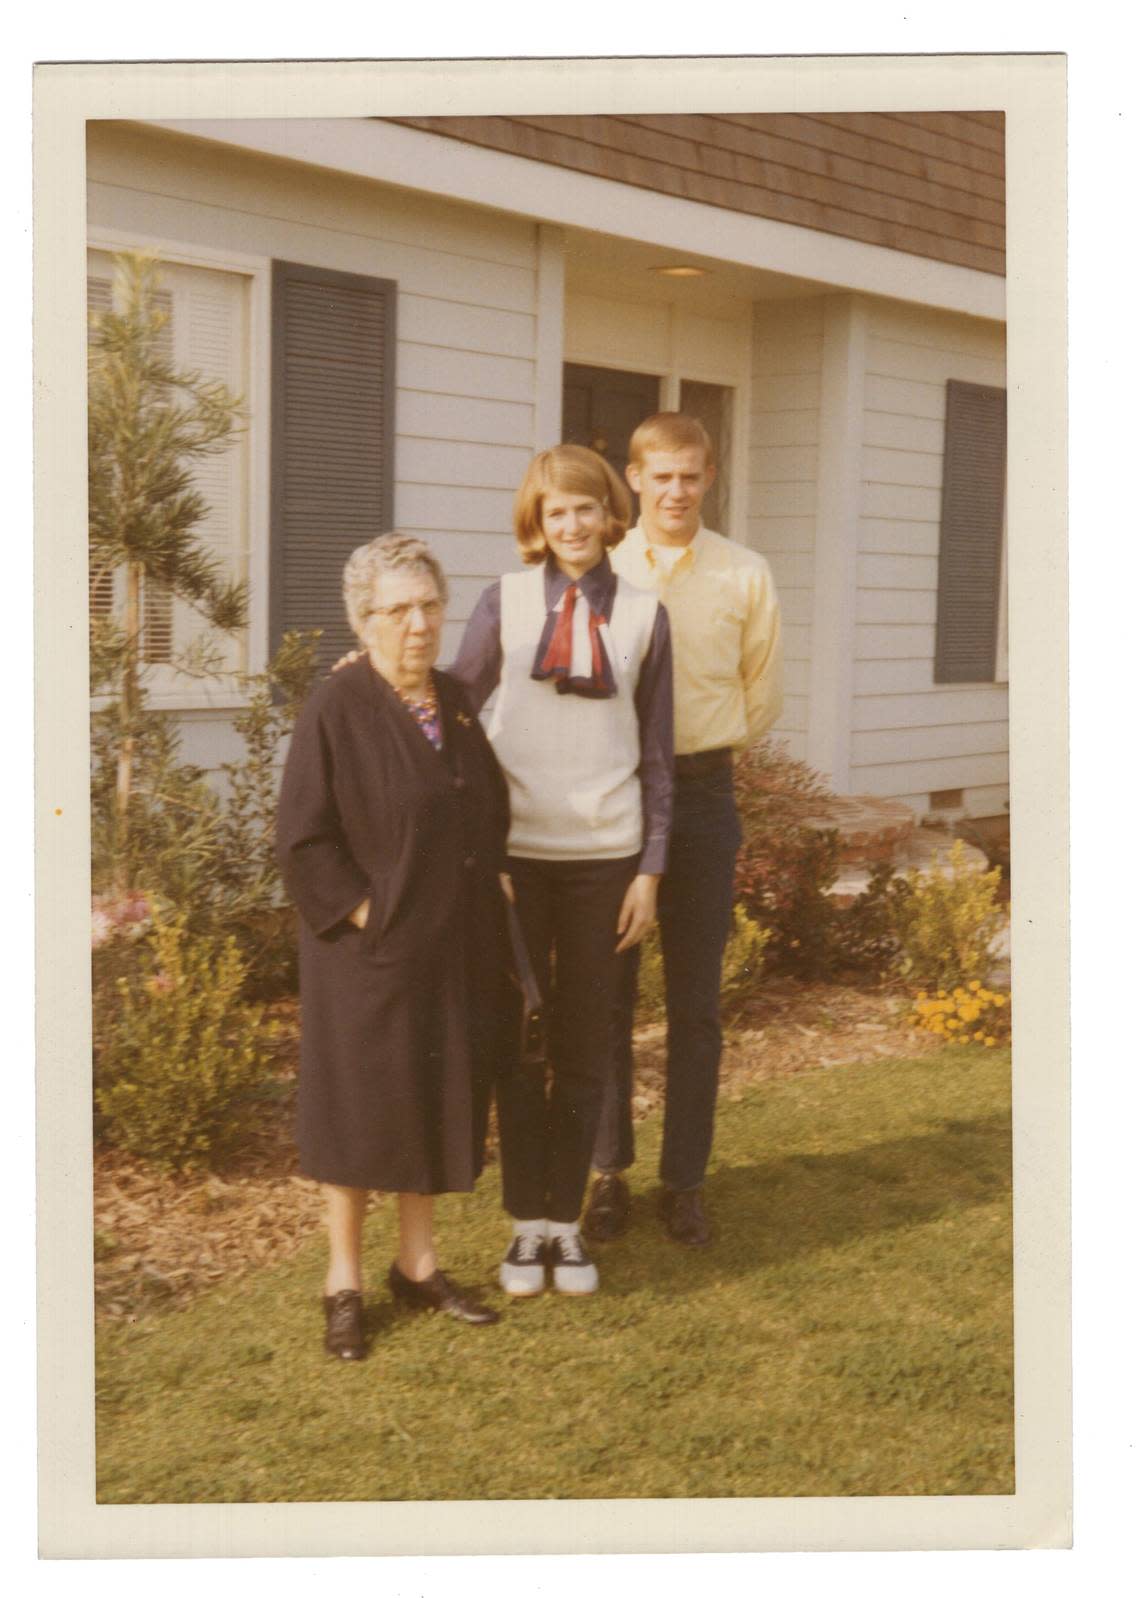 Ethel Staples, left, and her granddaughter Nancy Staples, center, whose married surname is Barr, in November 1970. On the back of the photograph, Ethel had written, “I’m not as cross as I look.” This photograph was sold at Schiff Estate Services on a Del Paso Boulevard in Sacramento in December.